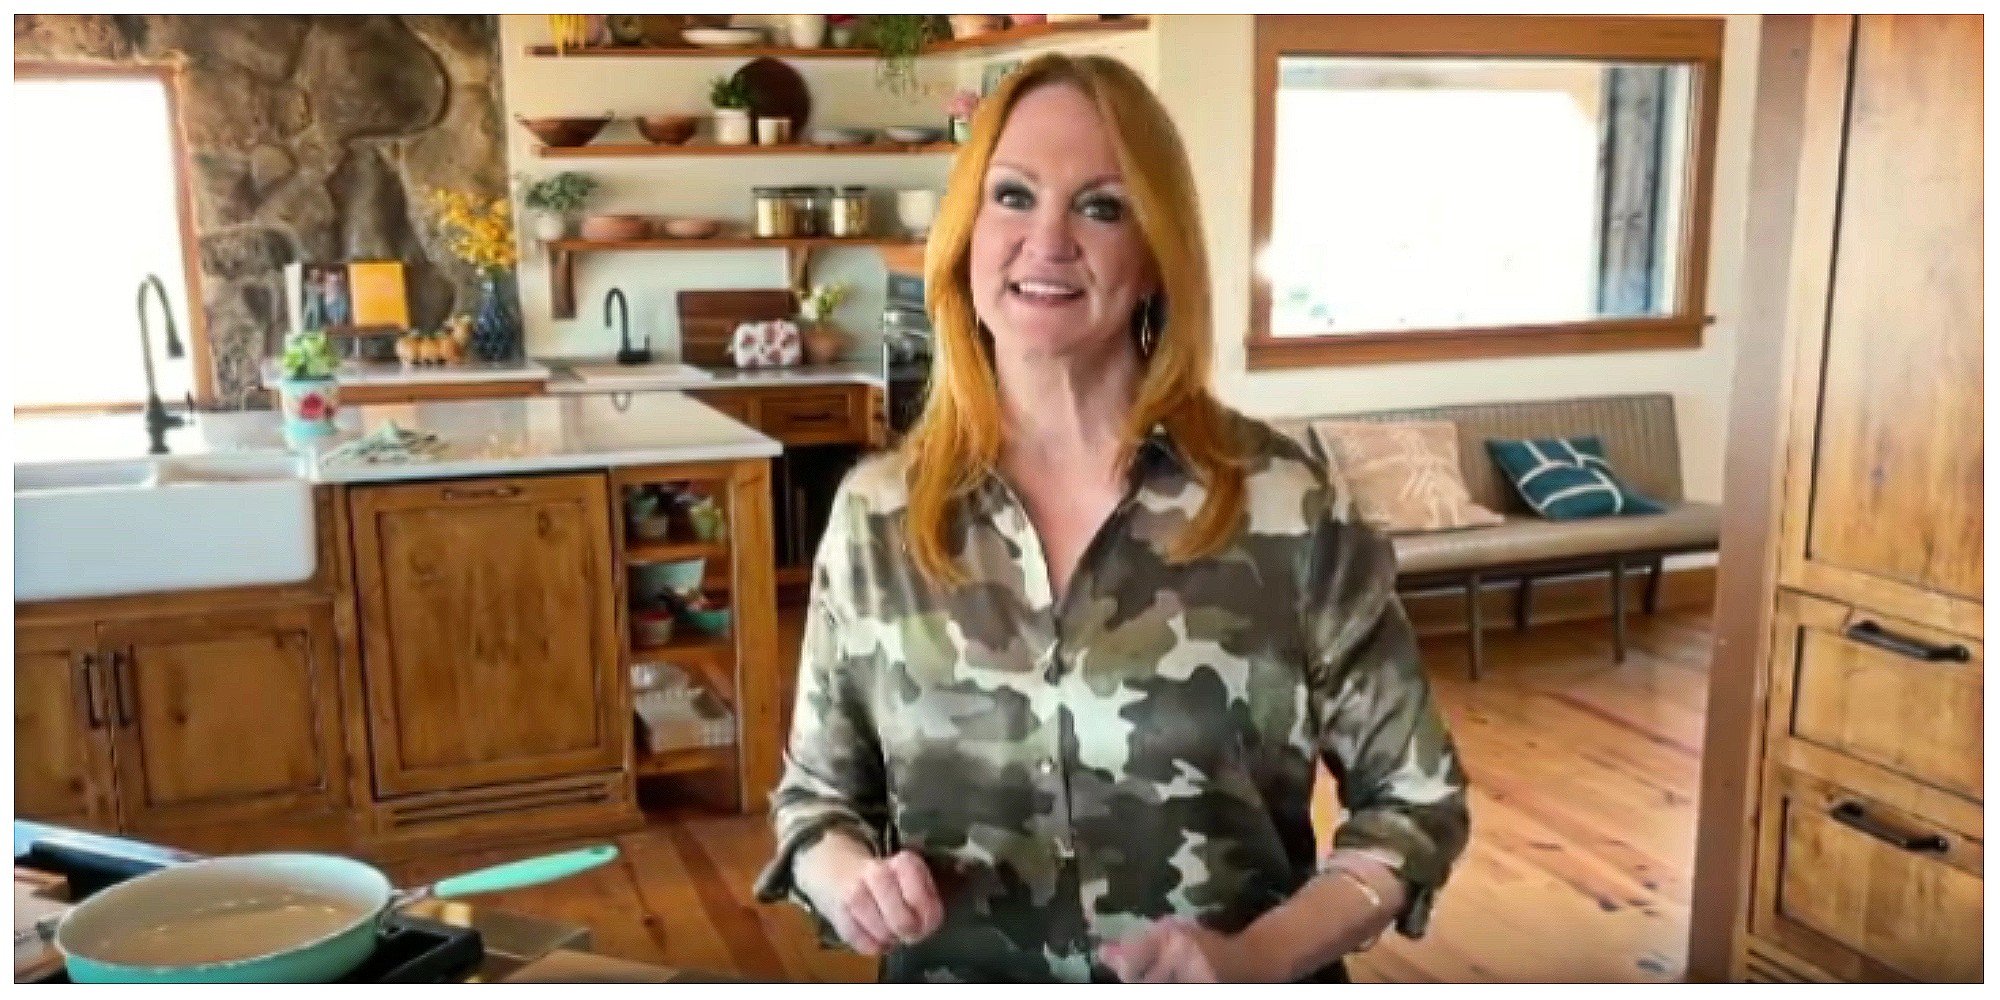 Ree Drummond poses on the set of an episode of The Pioneer Woman shot by her family, a new tradition.